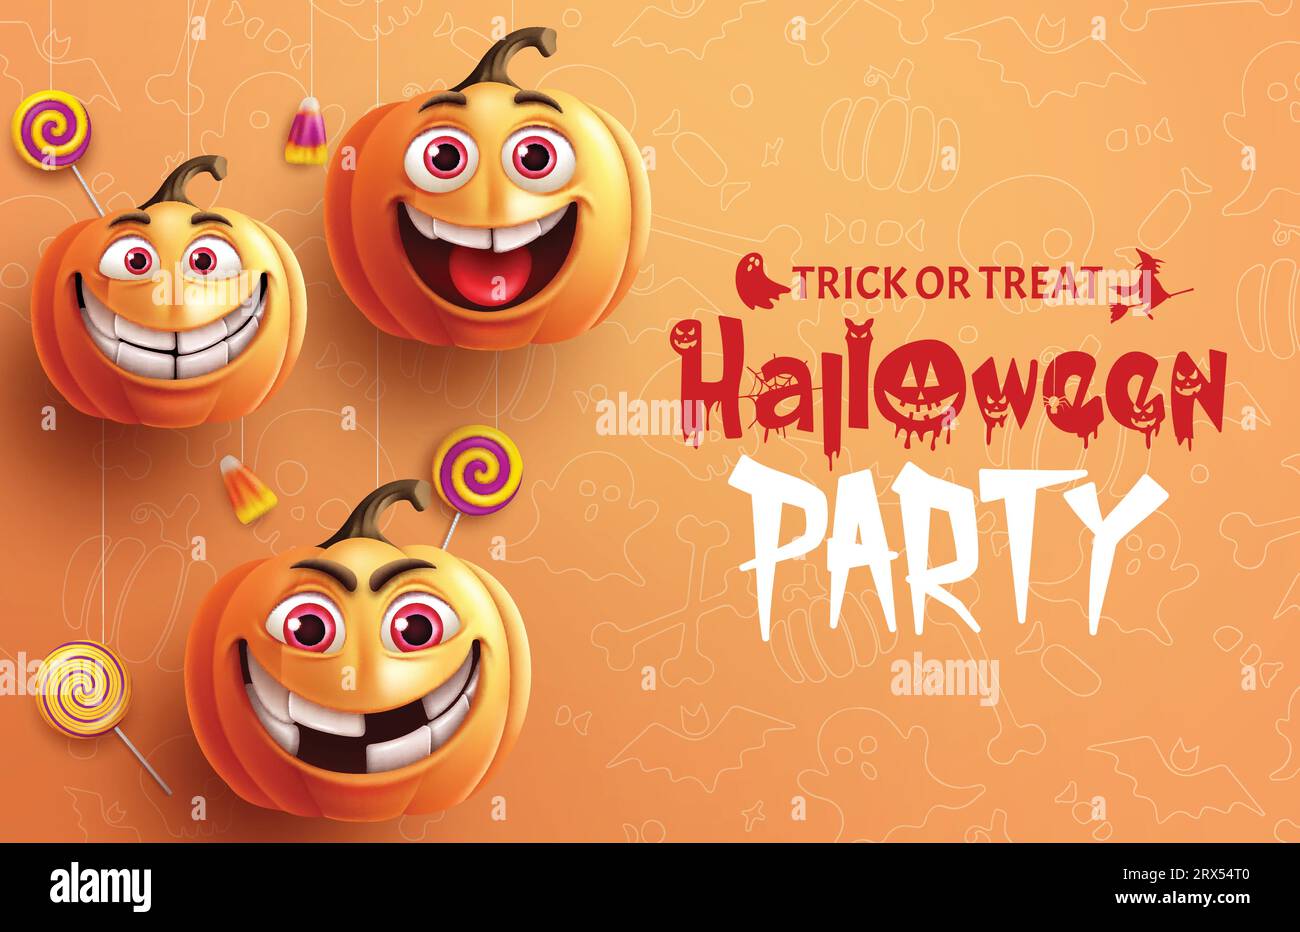 Halloween party text vector design. Halloween trick or treat invitation card with pumpkins smiling character elements in orange background. Vector Stock Vector